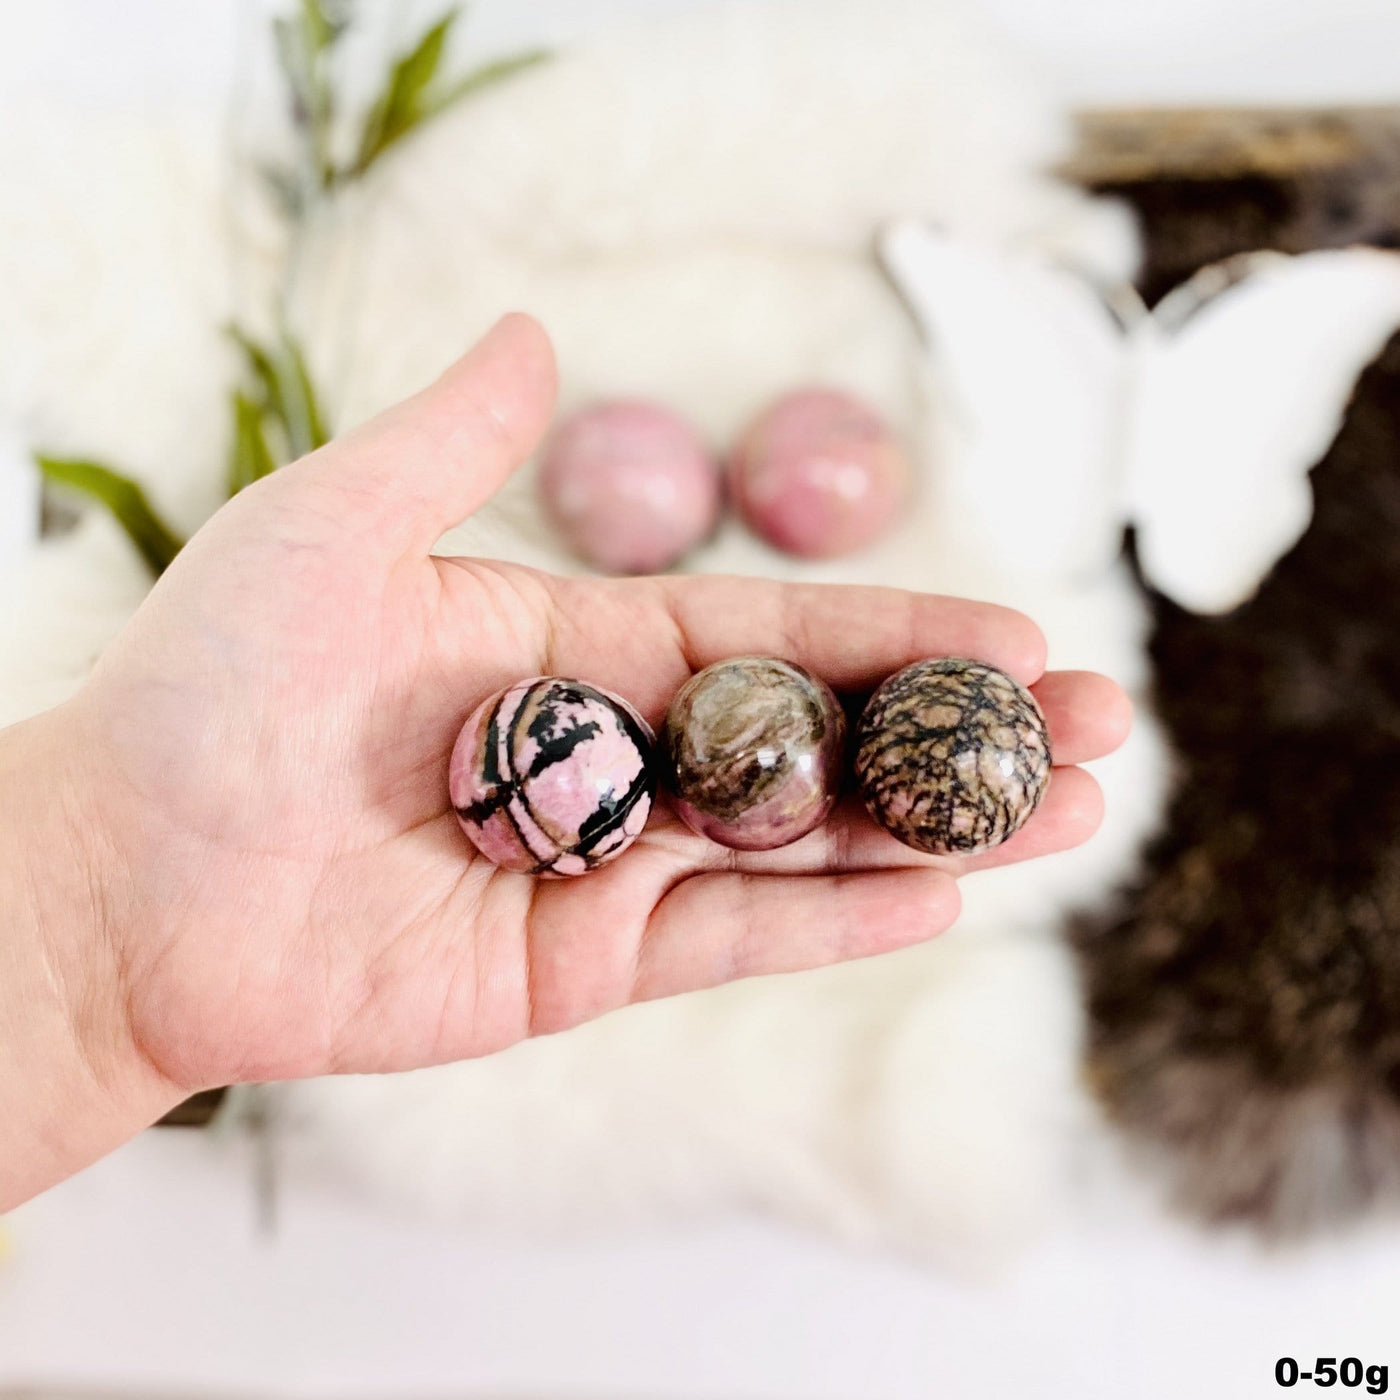 Hand holding up 3 0-50g Rhodonite Polished Spheres with decorations blurred in the background